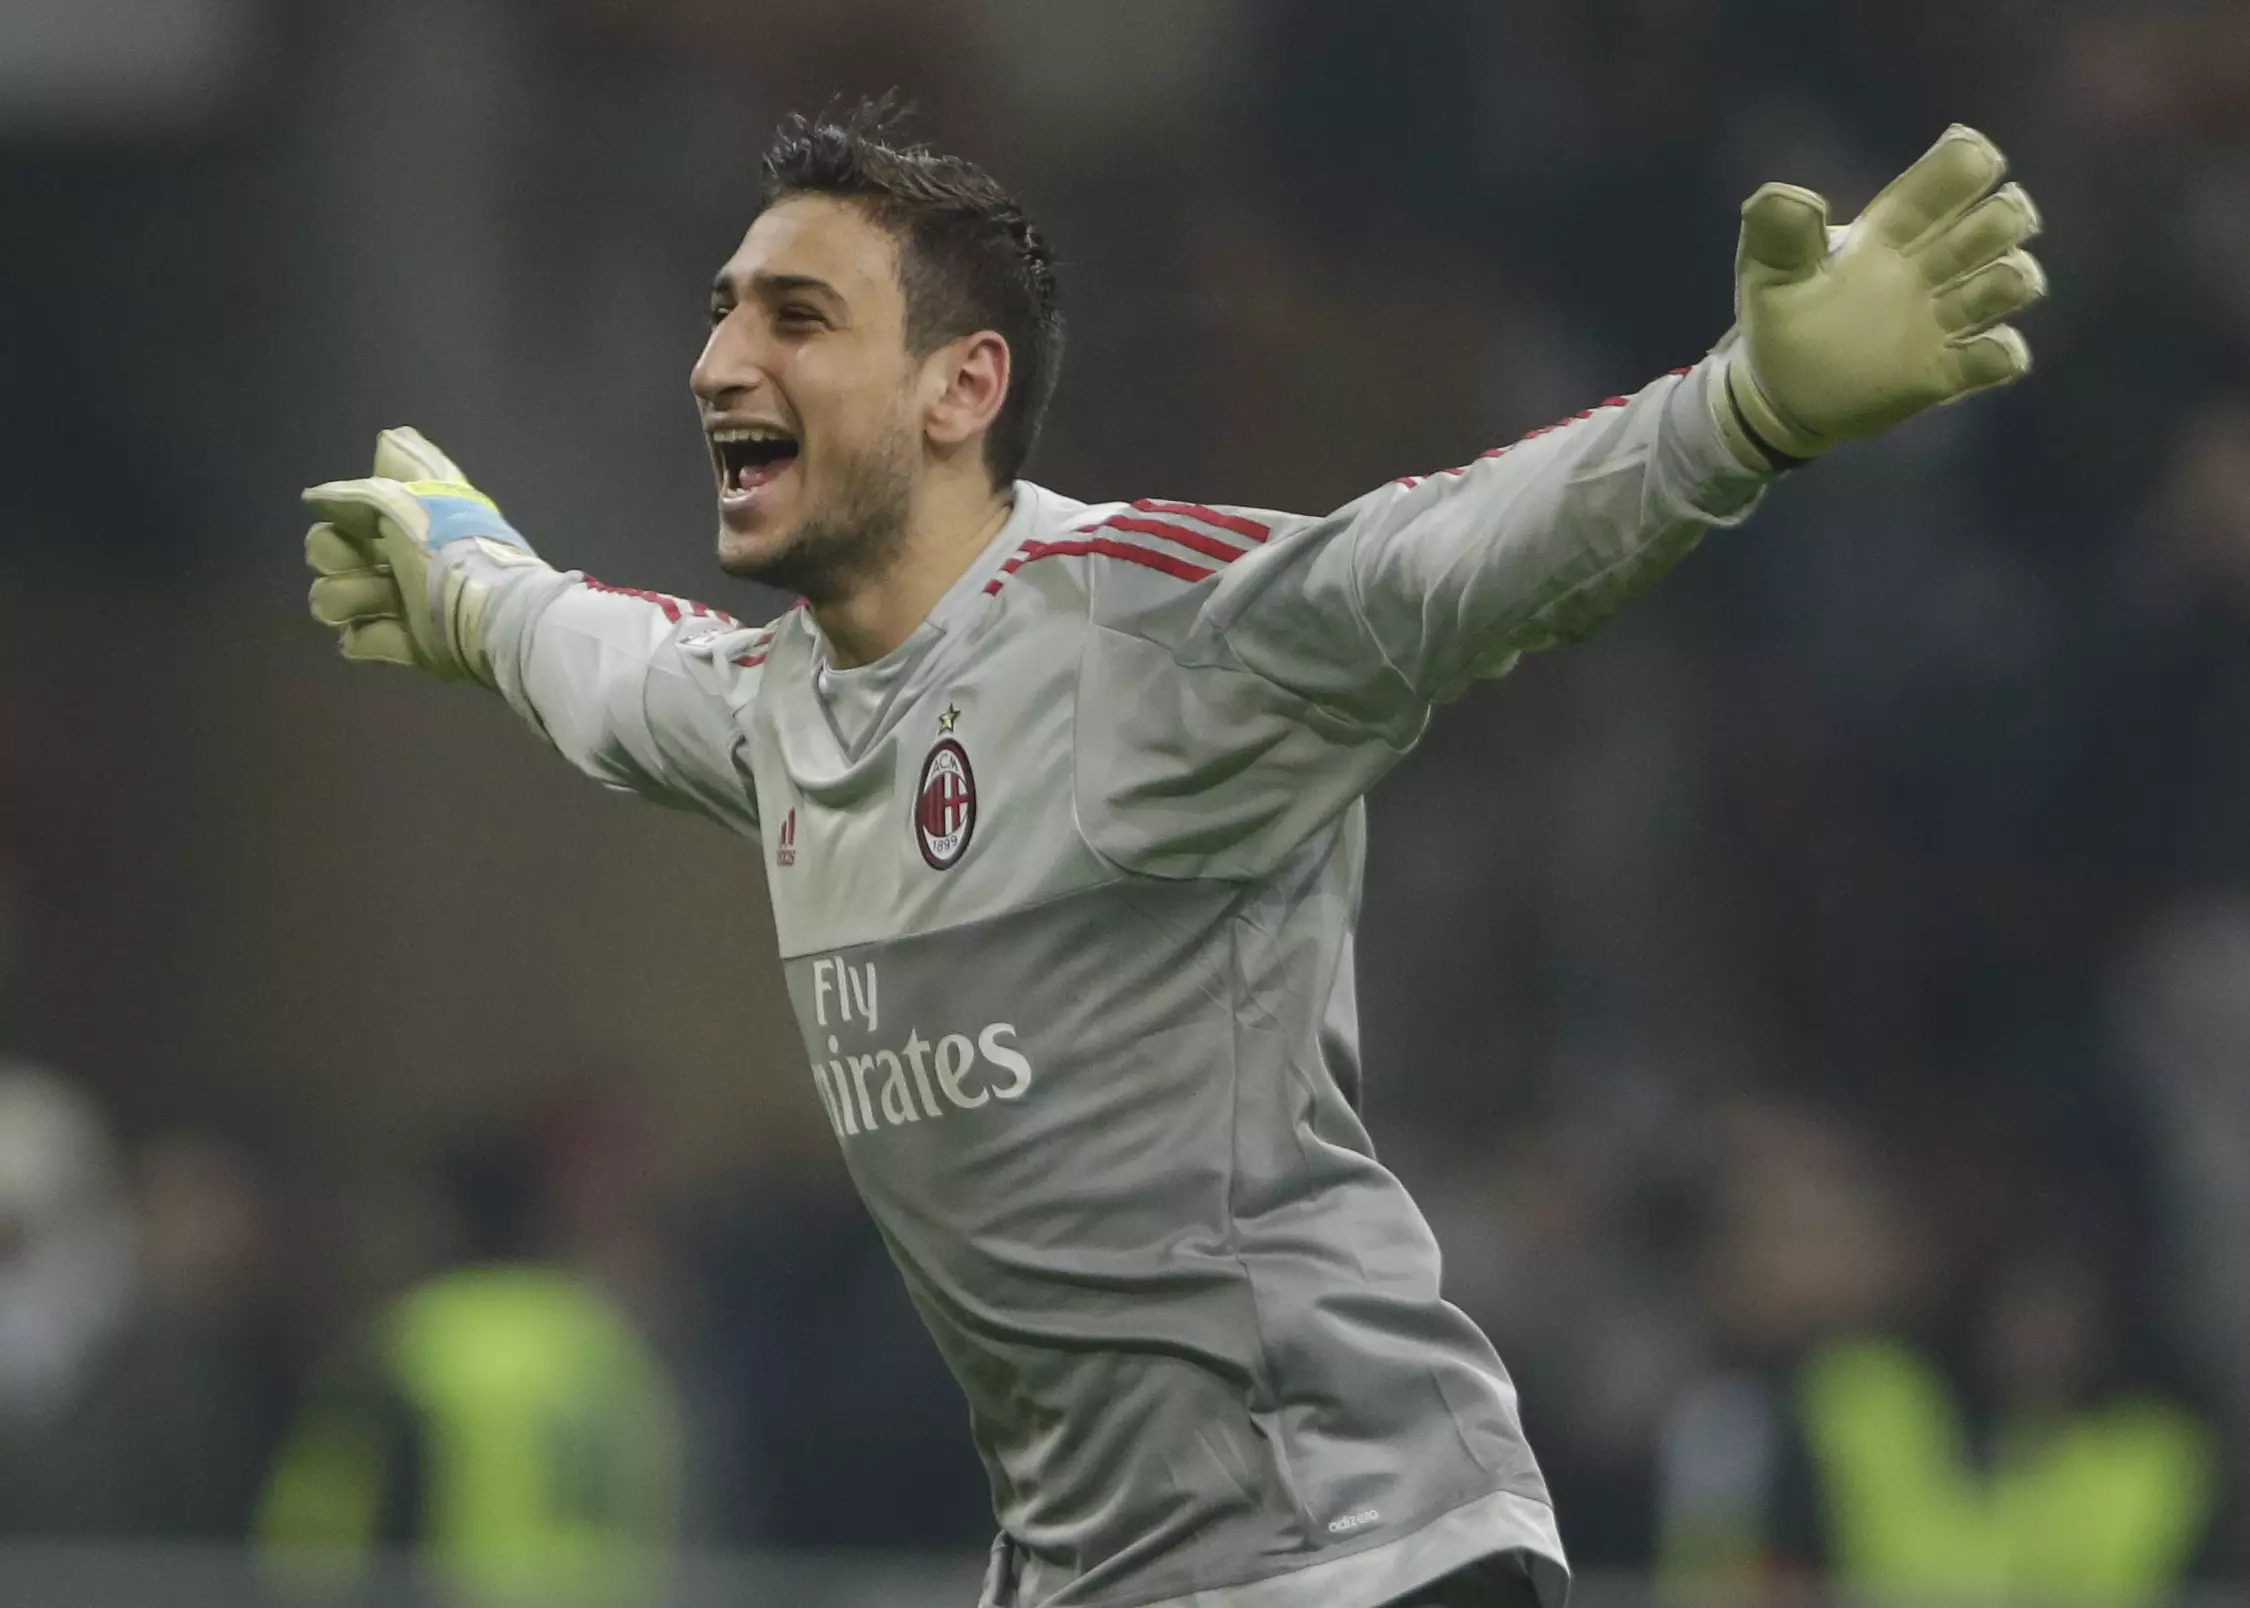 AC Milan’s 17-Year-Old Keeper Gigi Donnarumma The Proud Owner of Amazing Stat